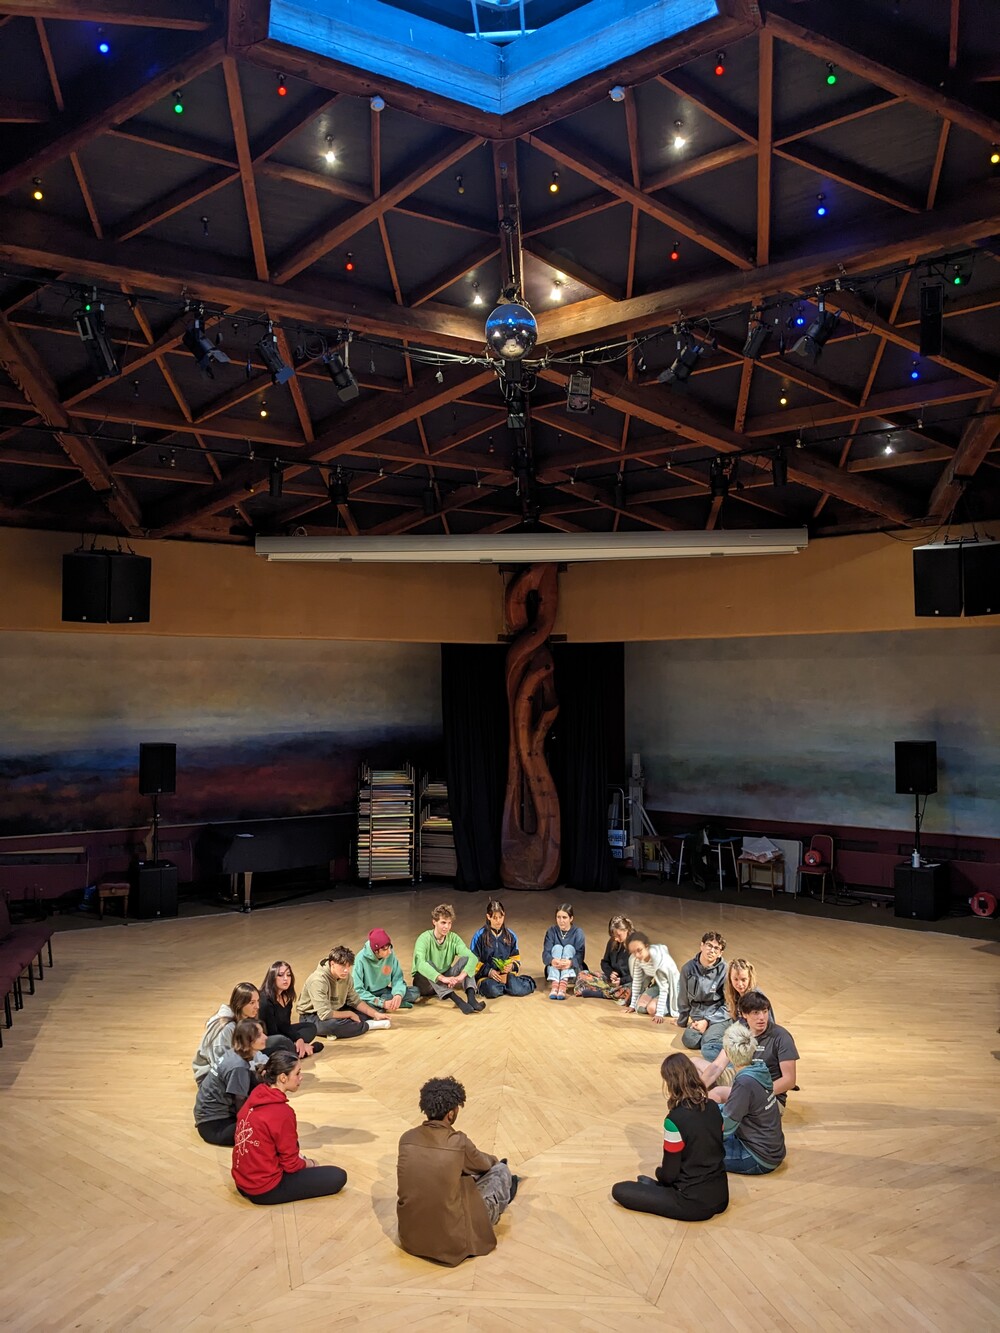 People sitting in a circle on floor